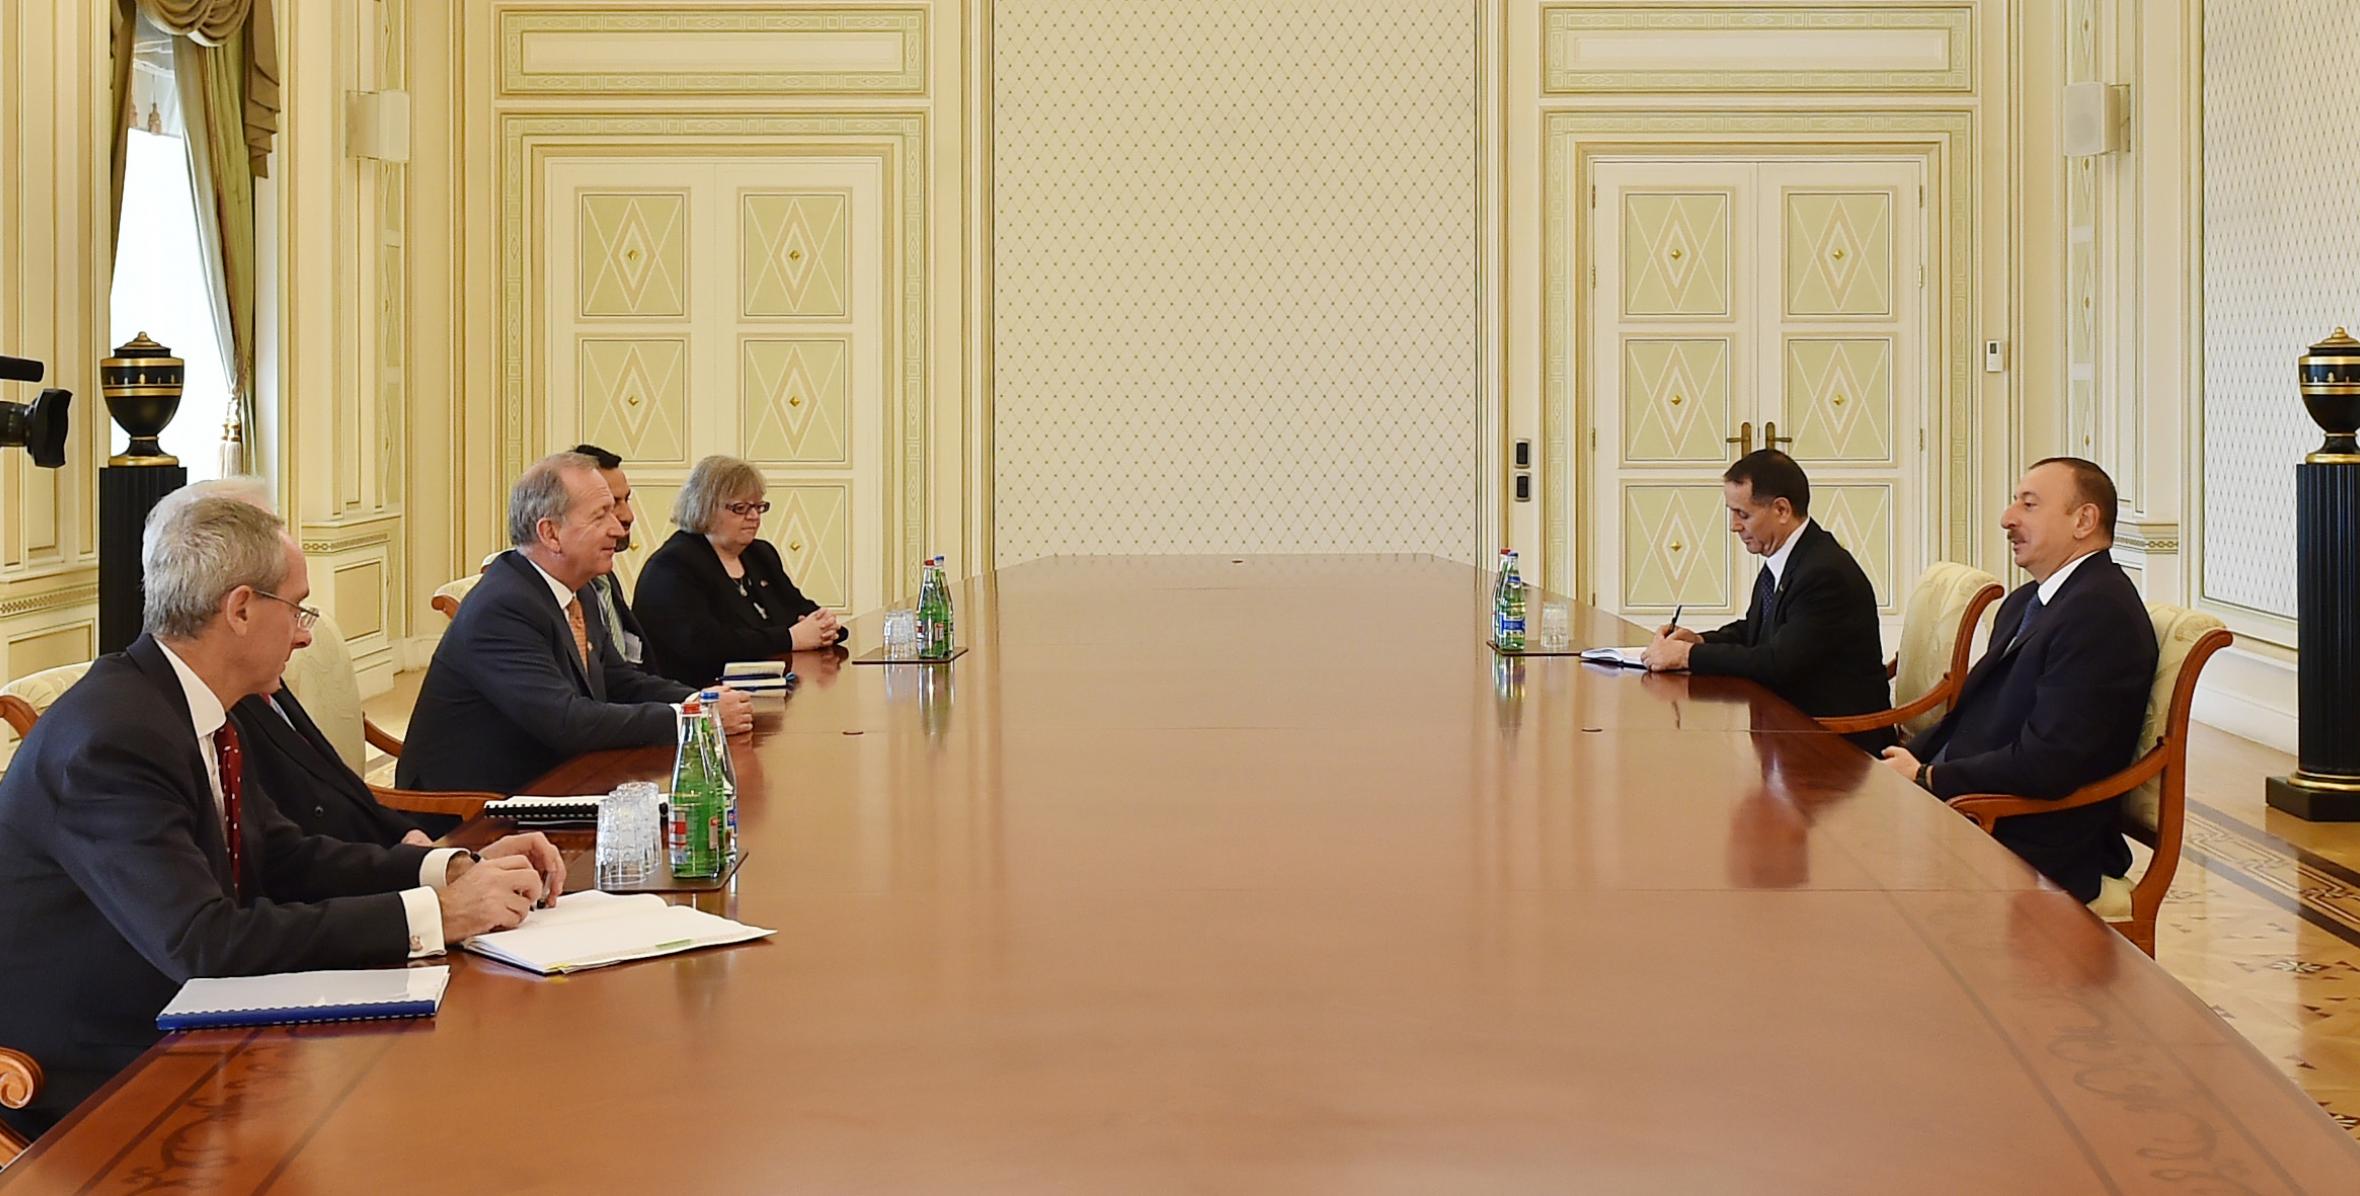 Ilham Aliyev received a delegation led by the Lord Mayor of London